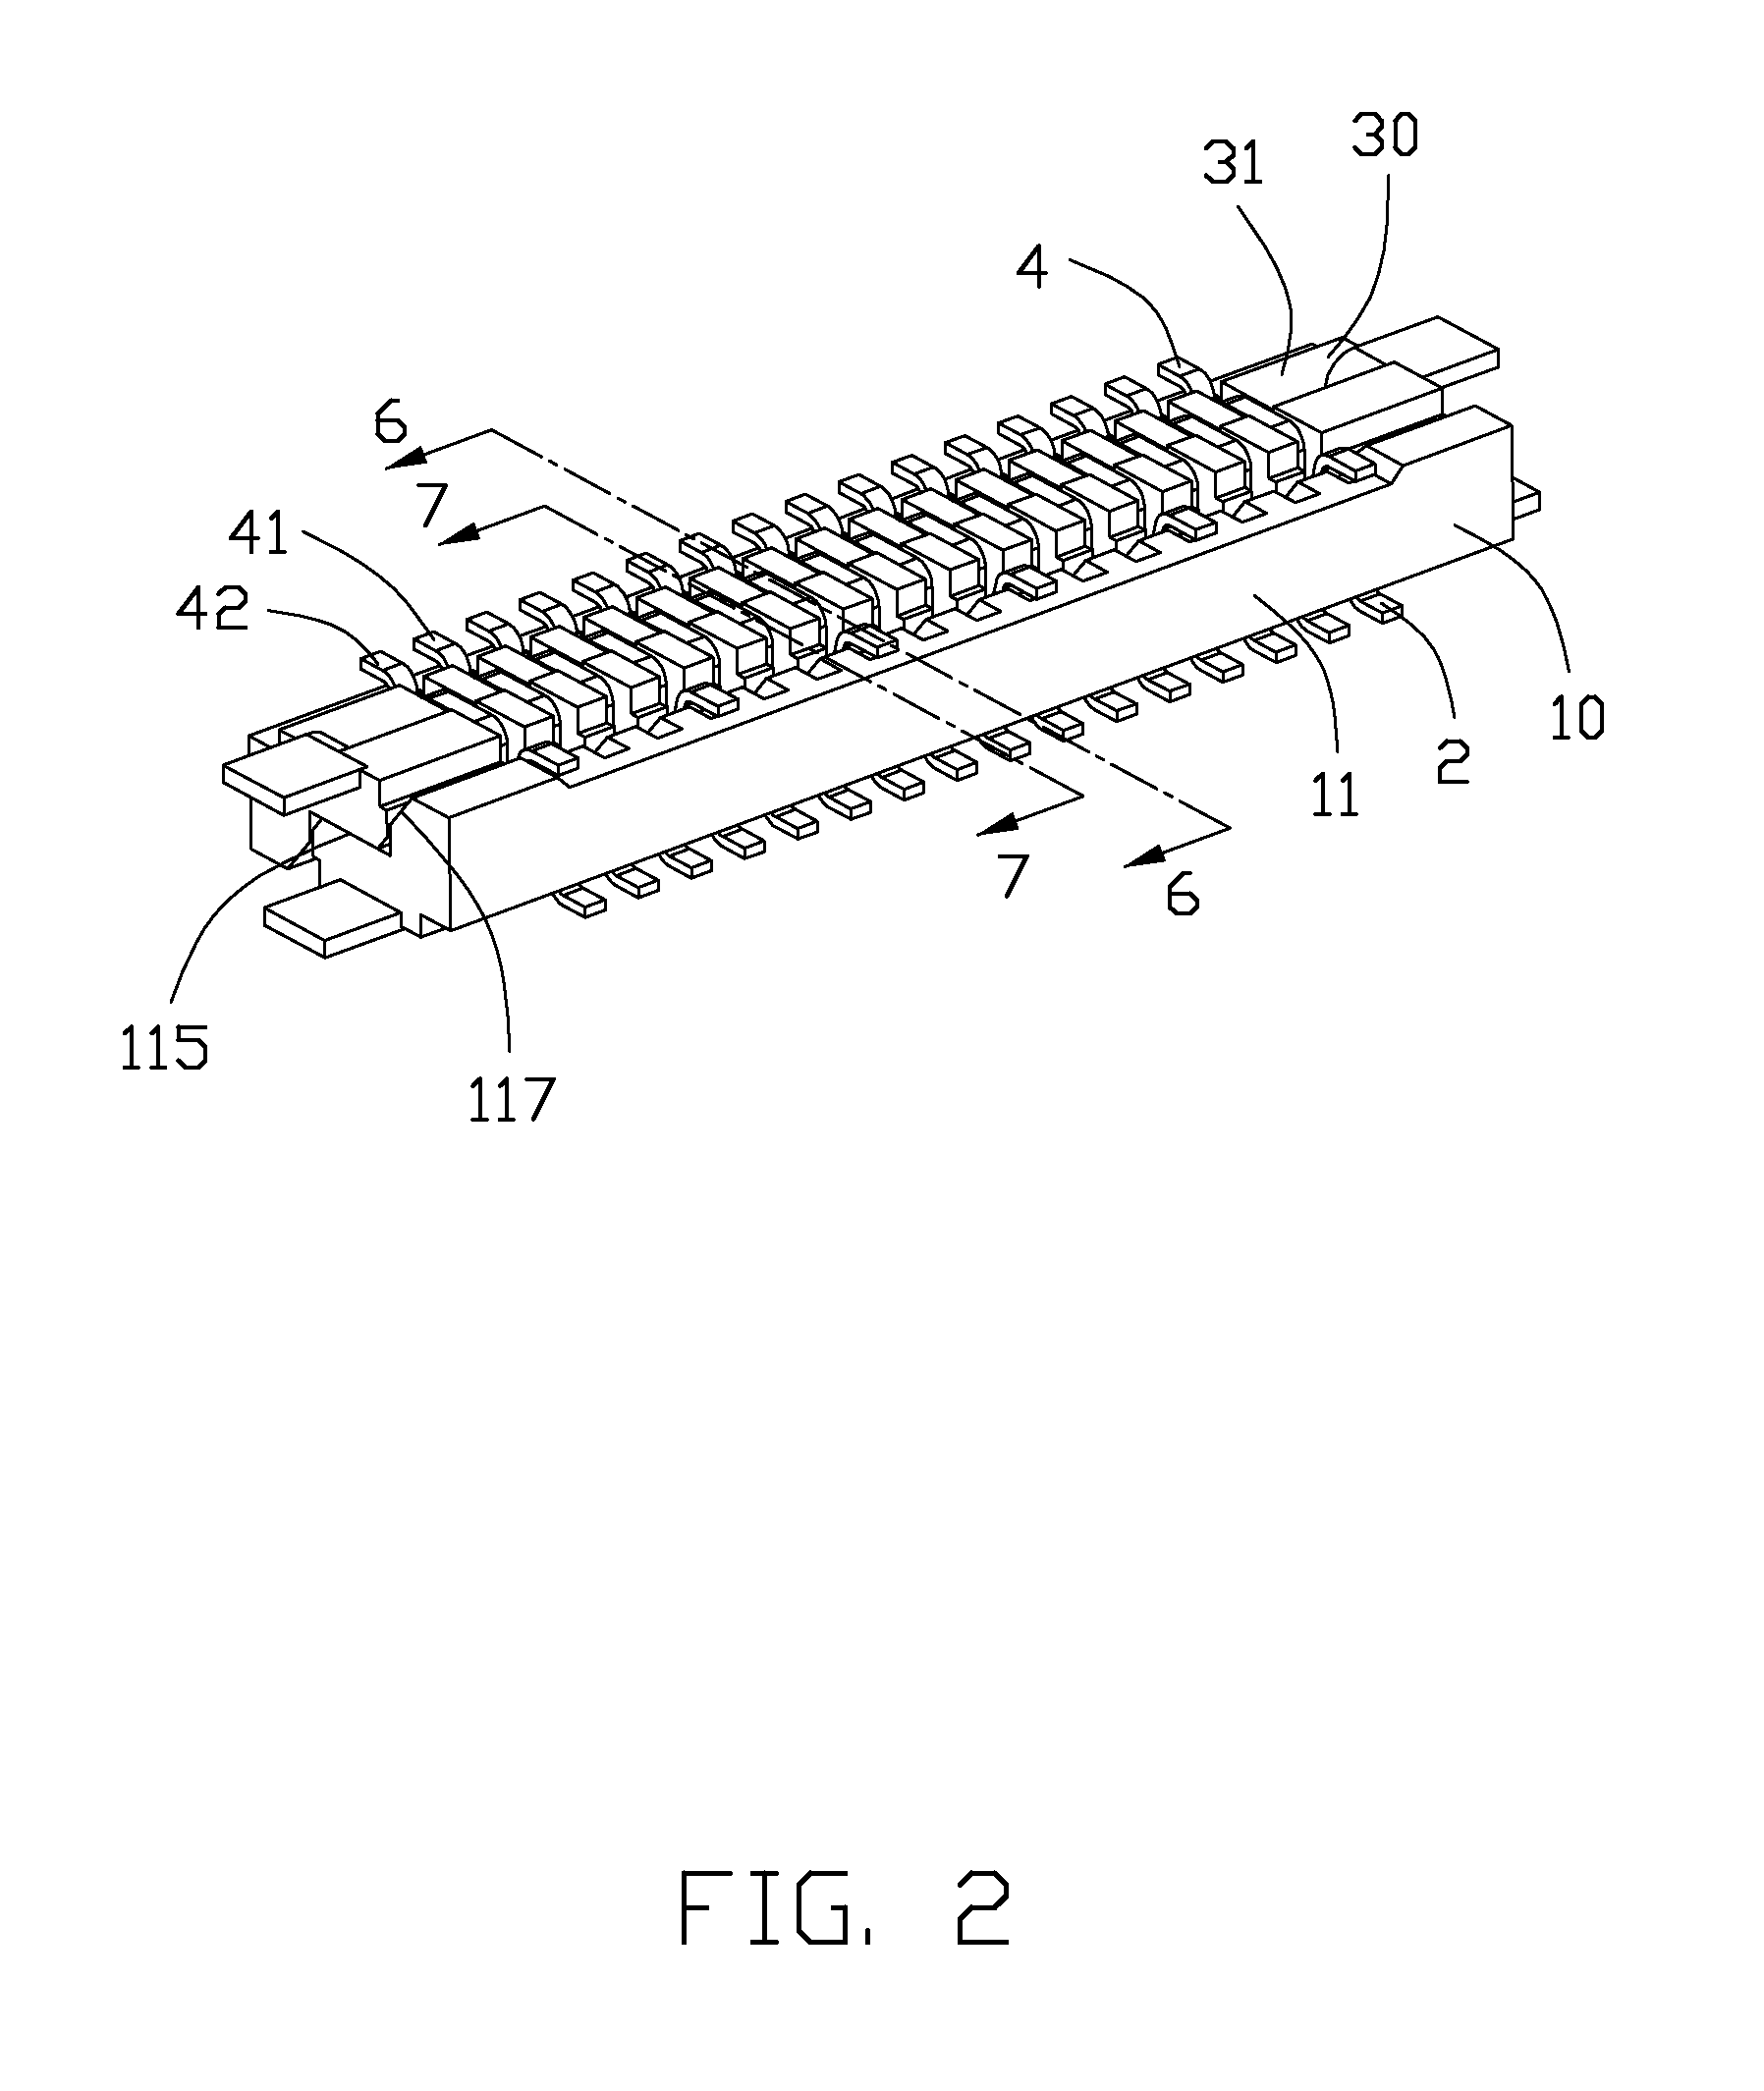 Board to board connector assembly having improved terminal arrangement